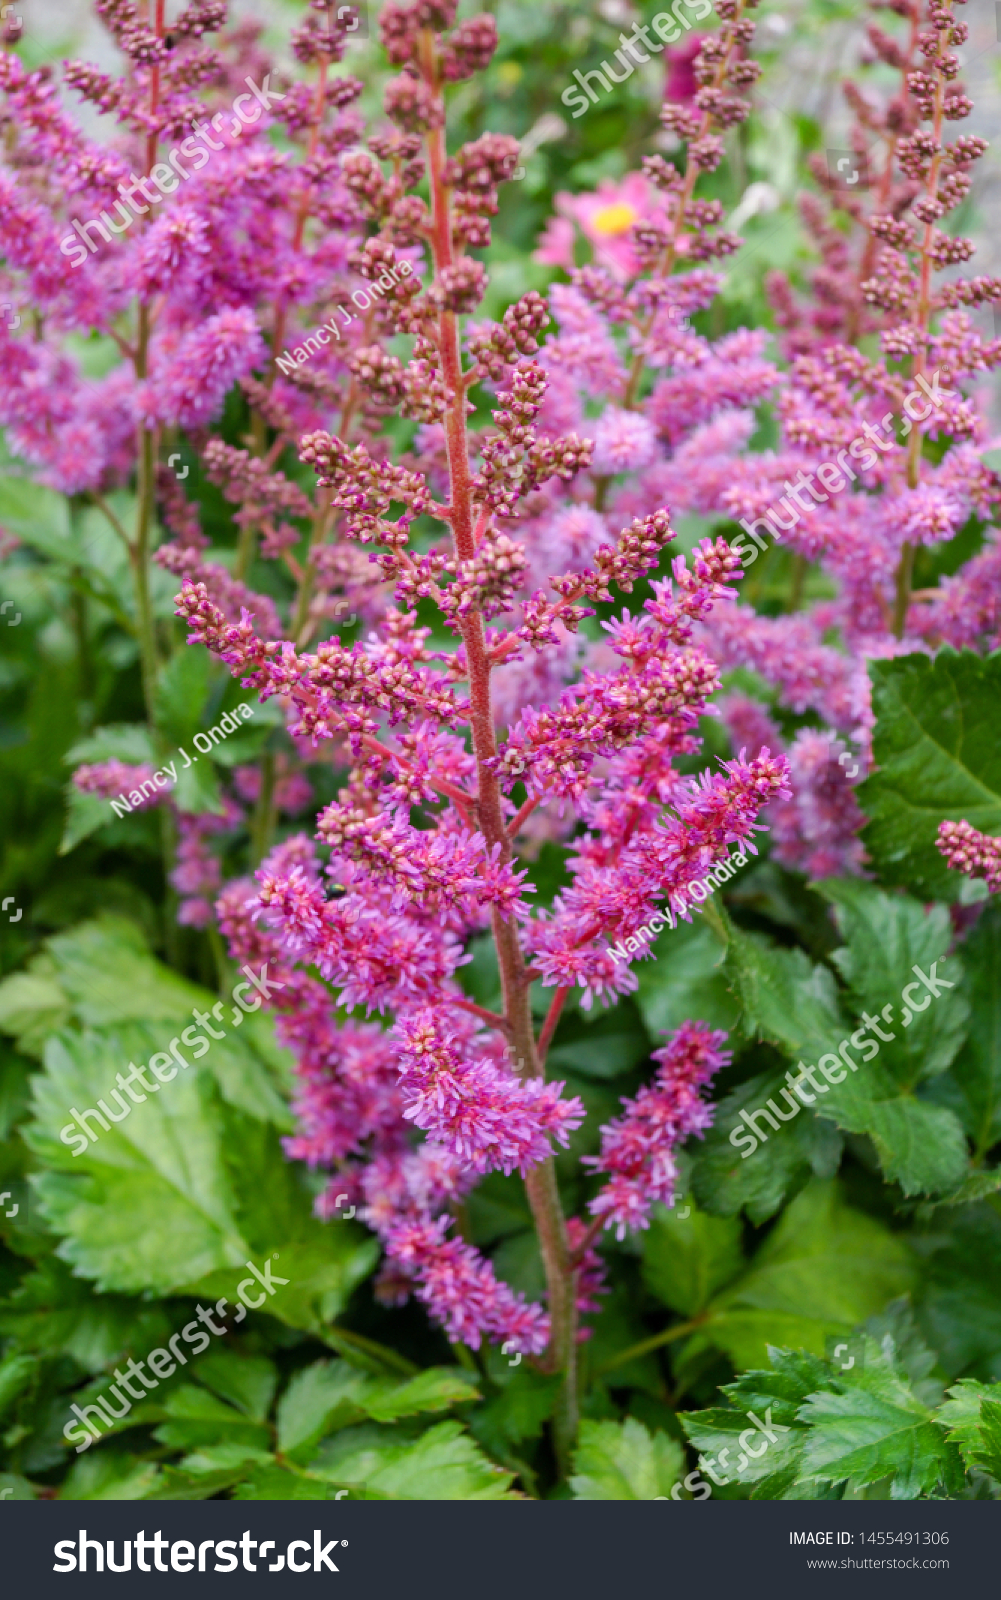 Vertical image of the purplish pink flowers of 'Visions' astilbe (Astilbe 'Visions') #1455491306